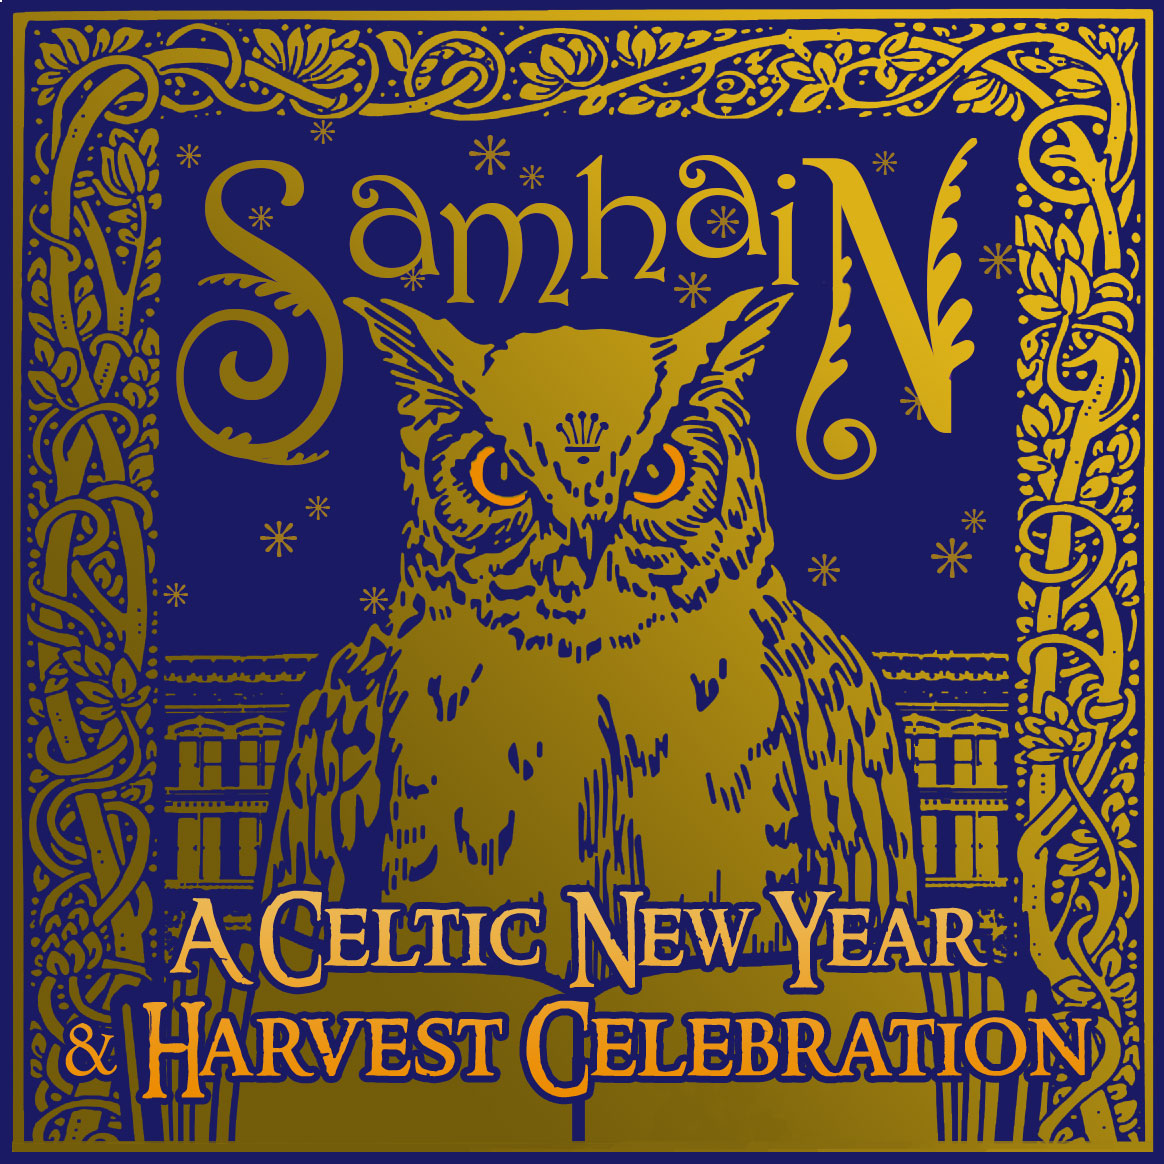 Samhain -- A Celtic New Year and Harvest Celebration! -- The Celtic Arts Center invites you to its Samhain Harvest Potluck